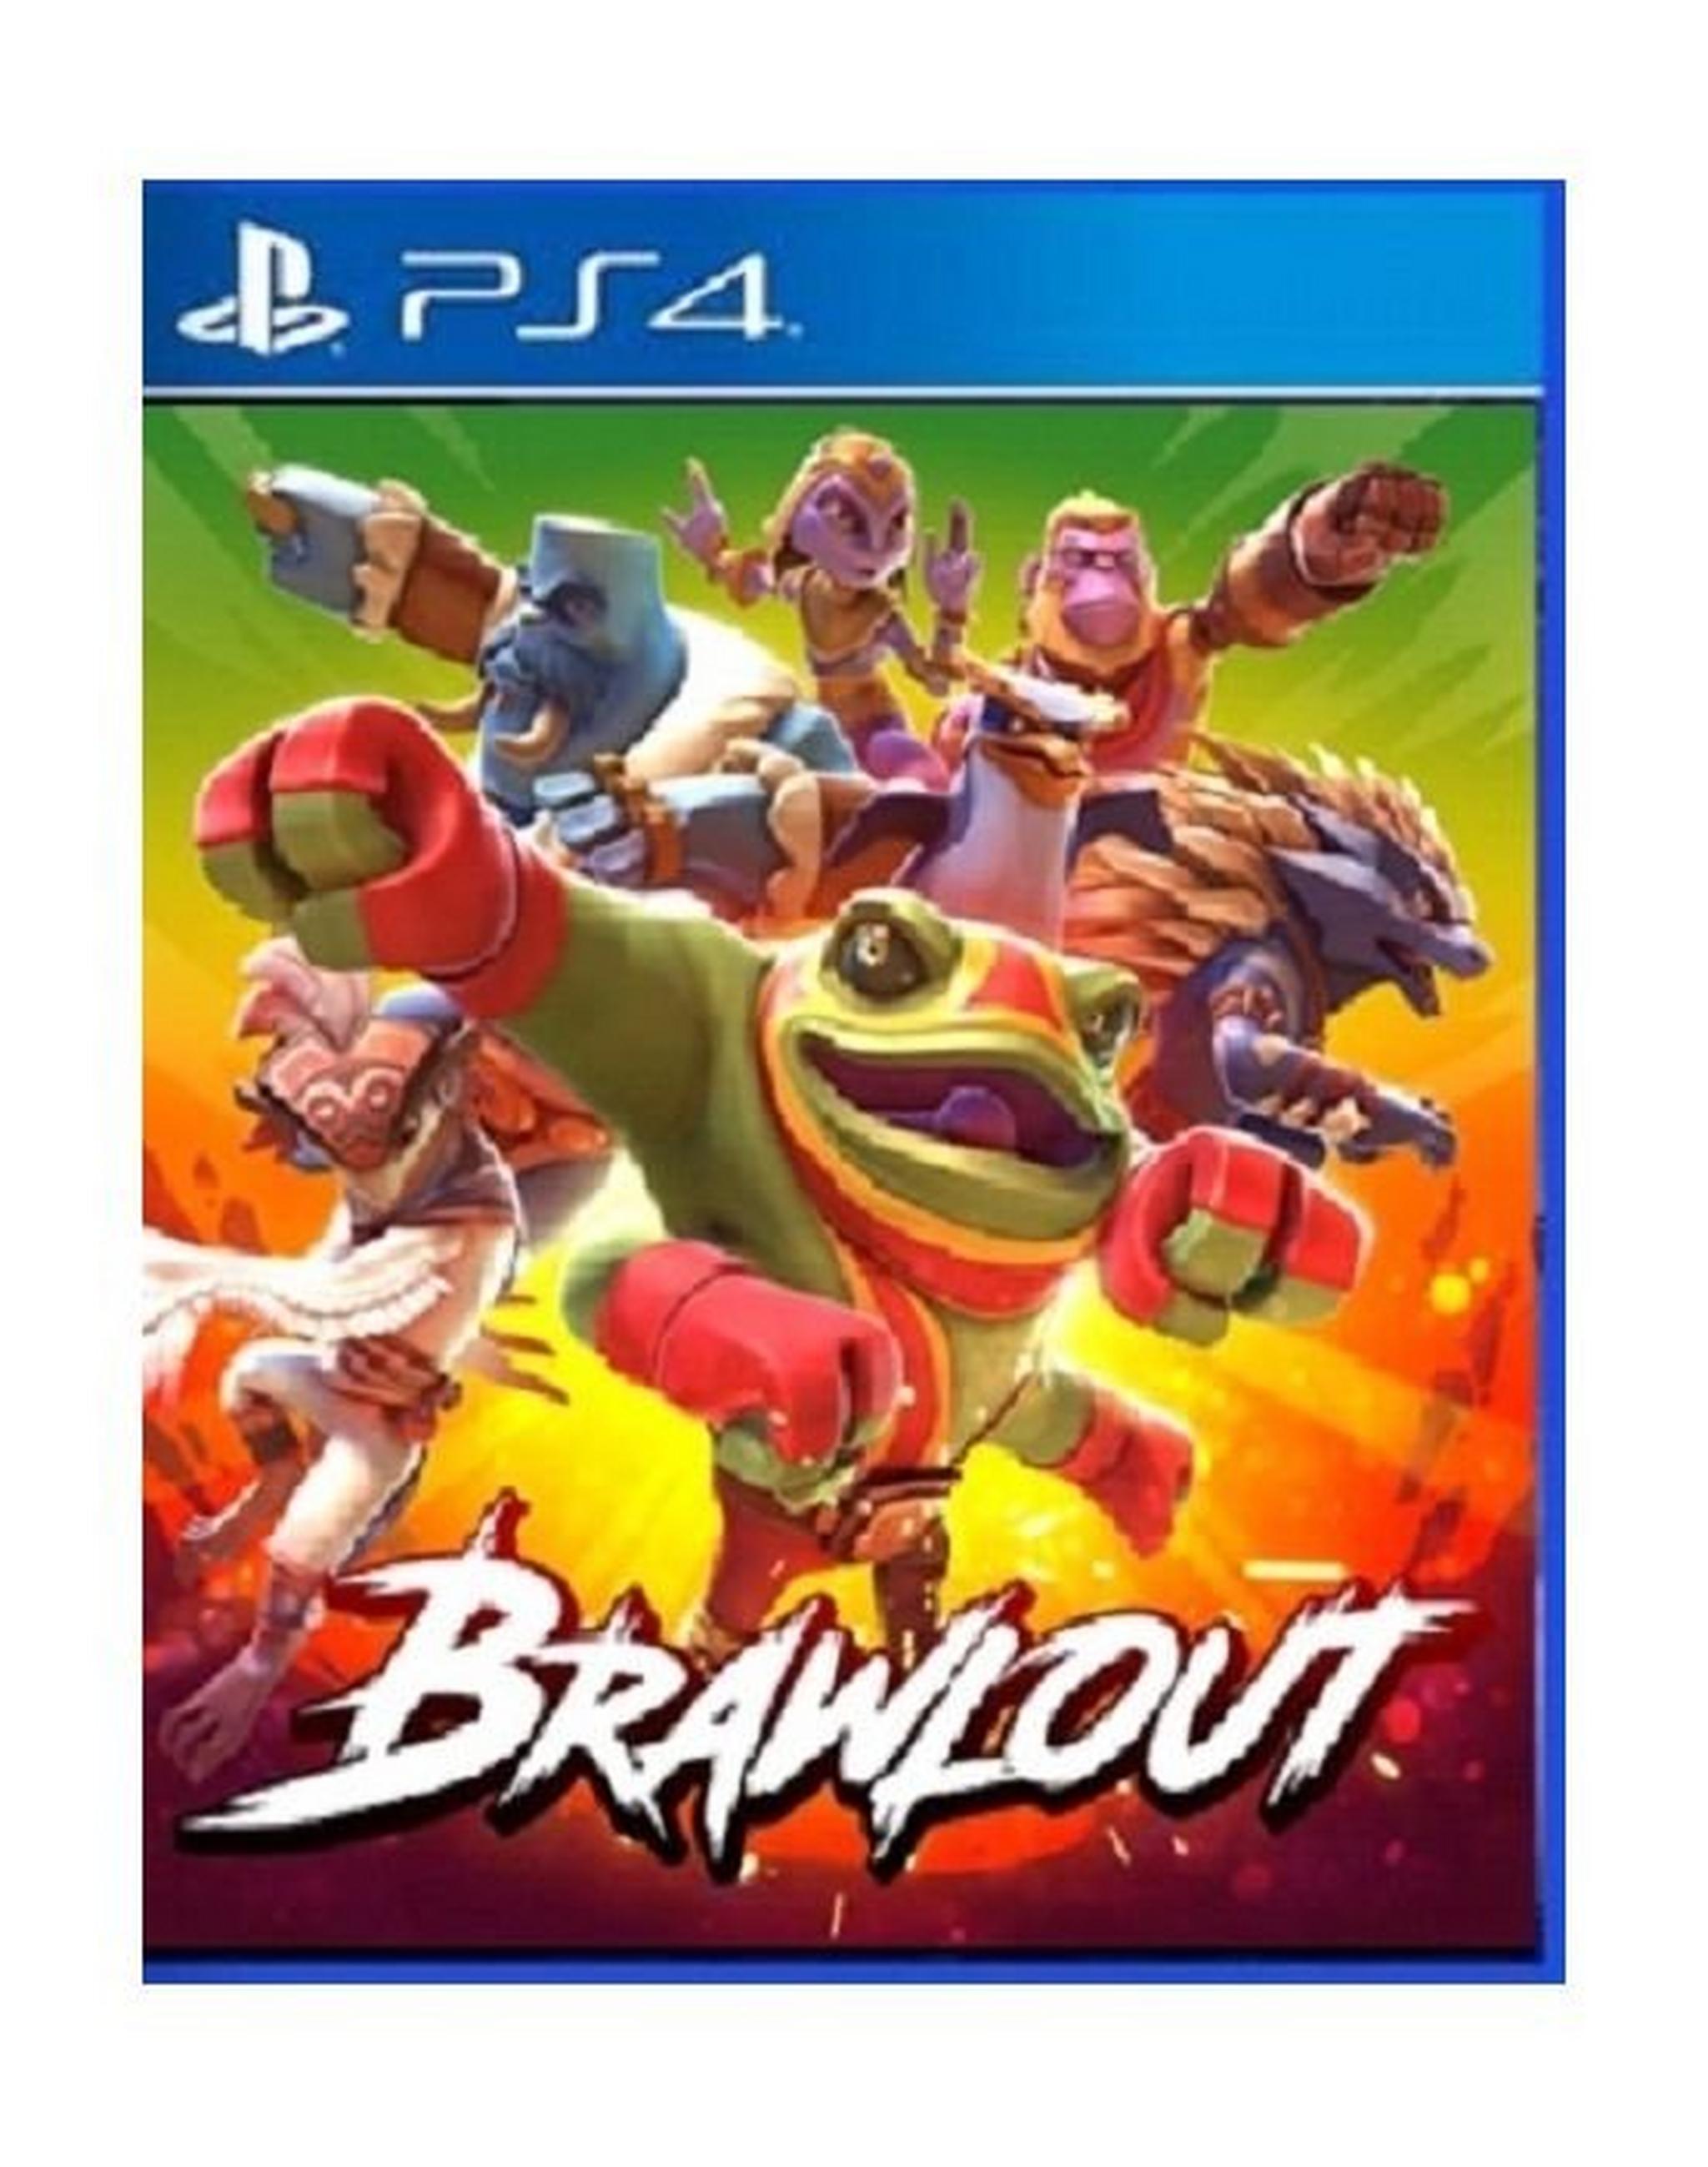 Brawlout - PlayStation 4 Game